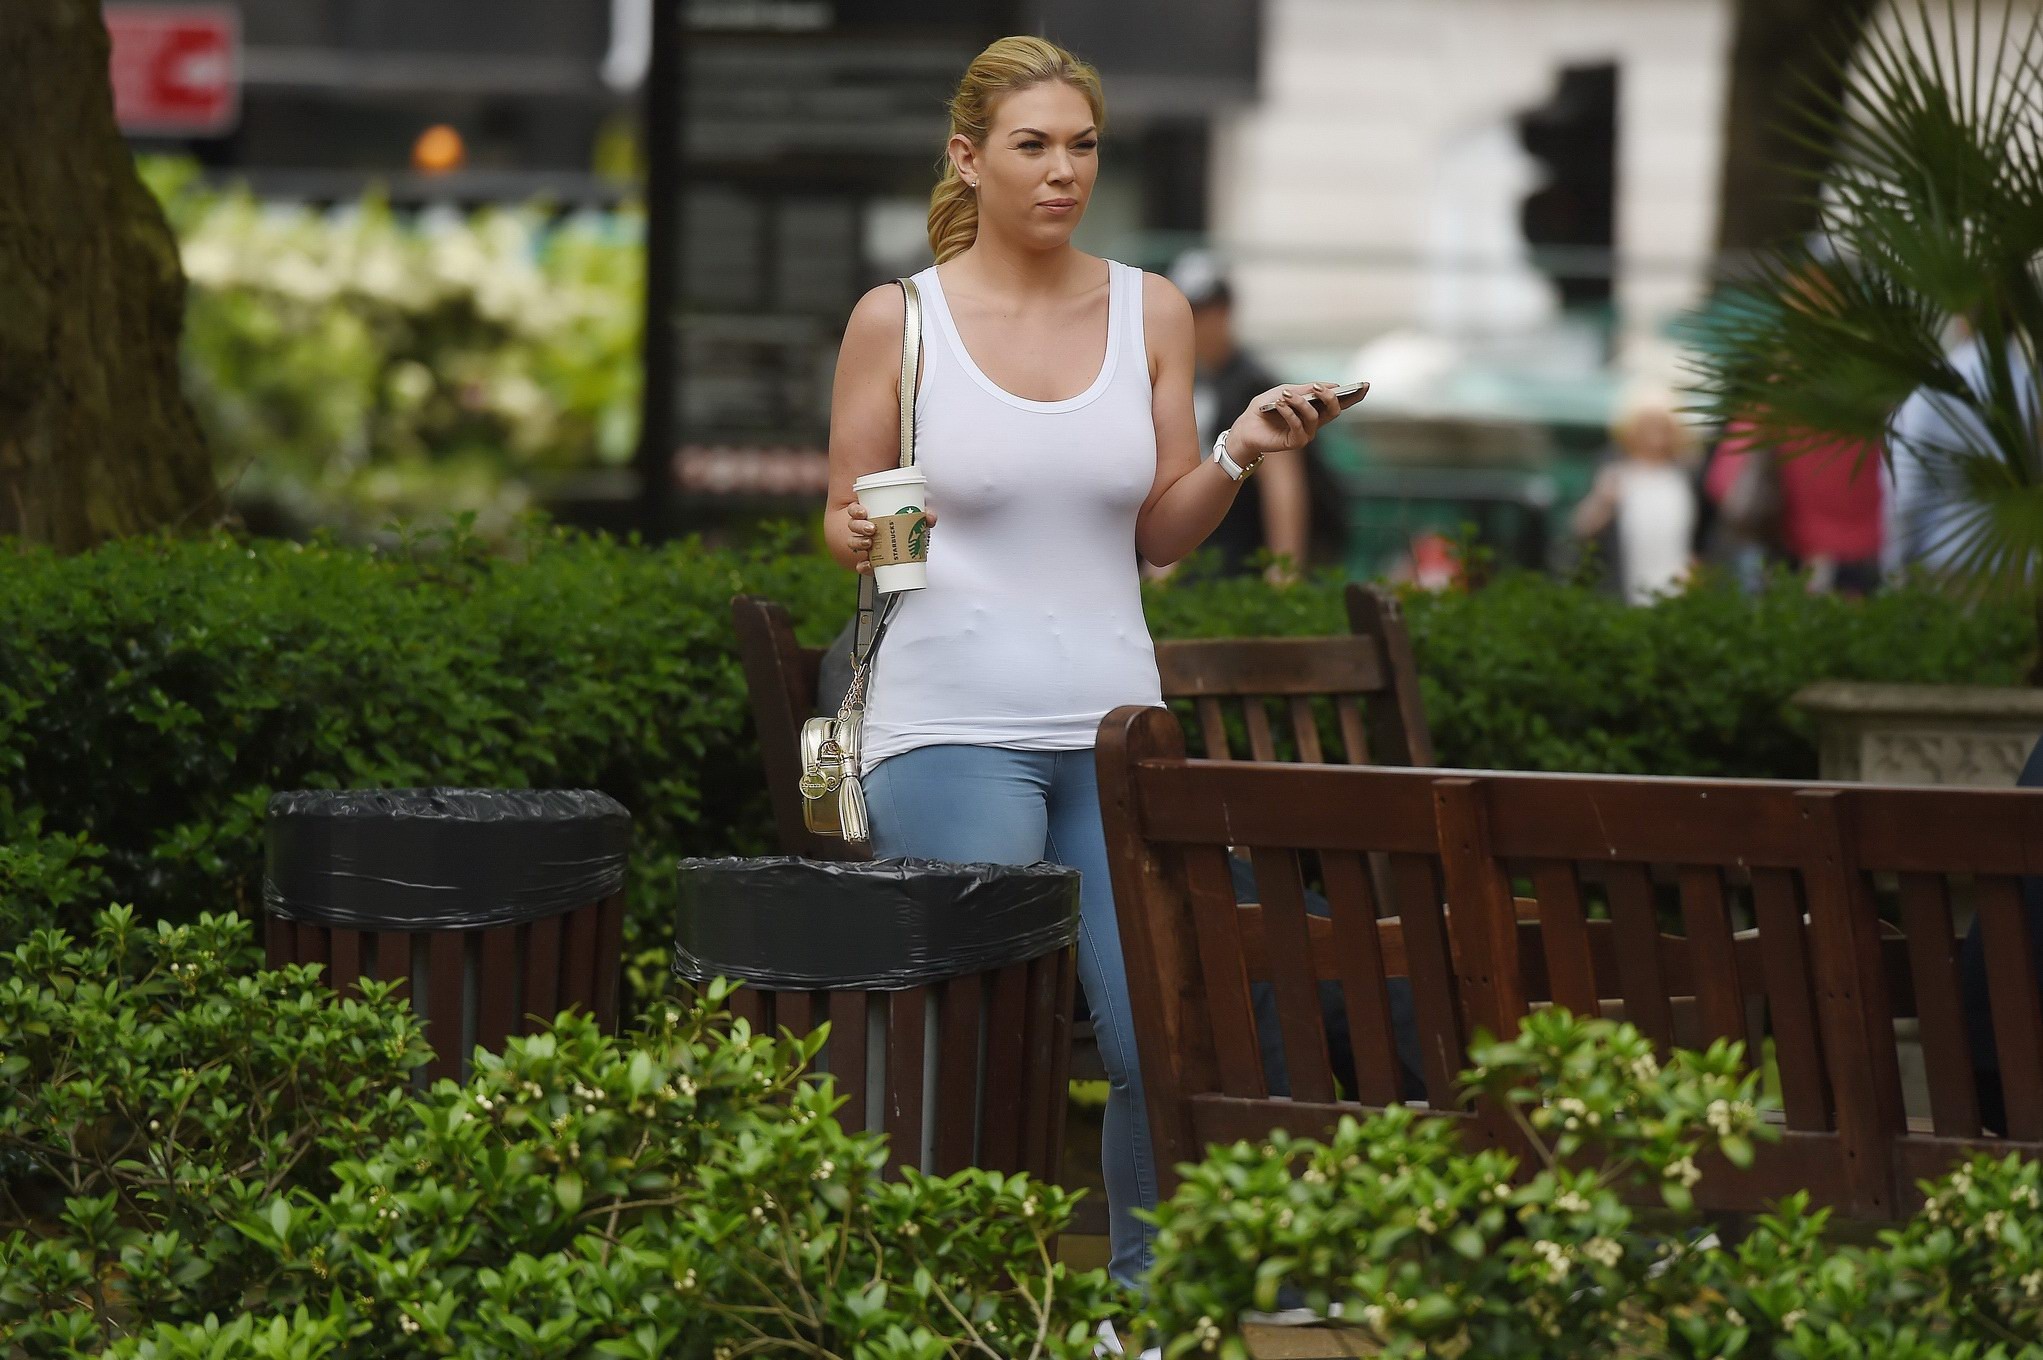 Busty Frankie Essex braless downblouse at a park in London #75162048